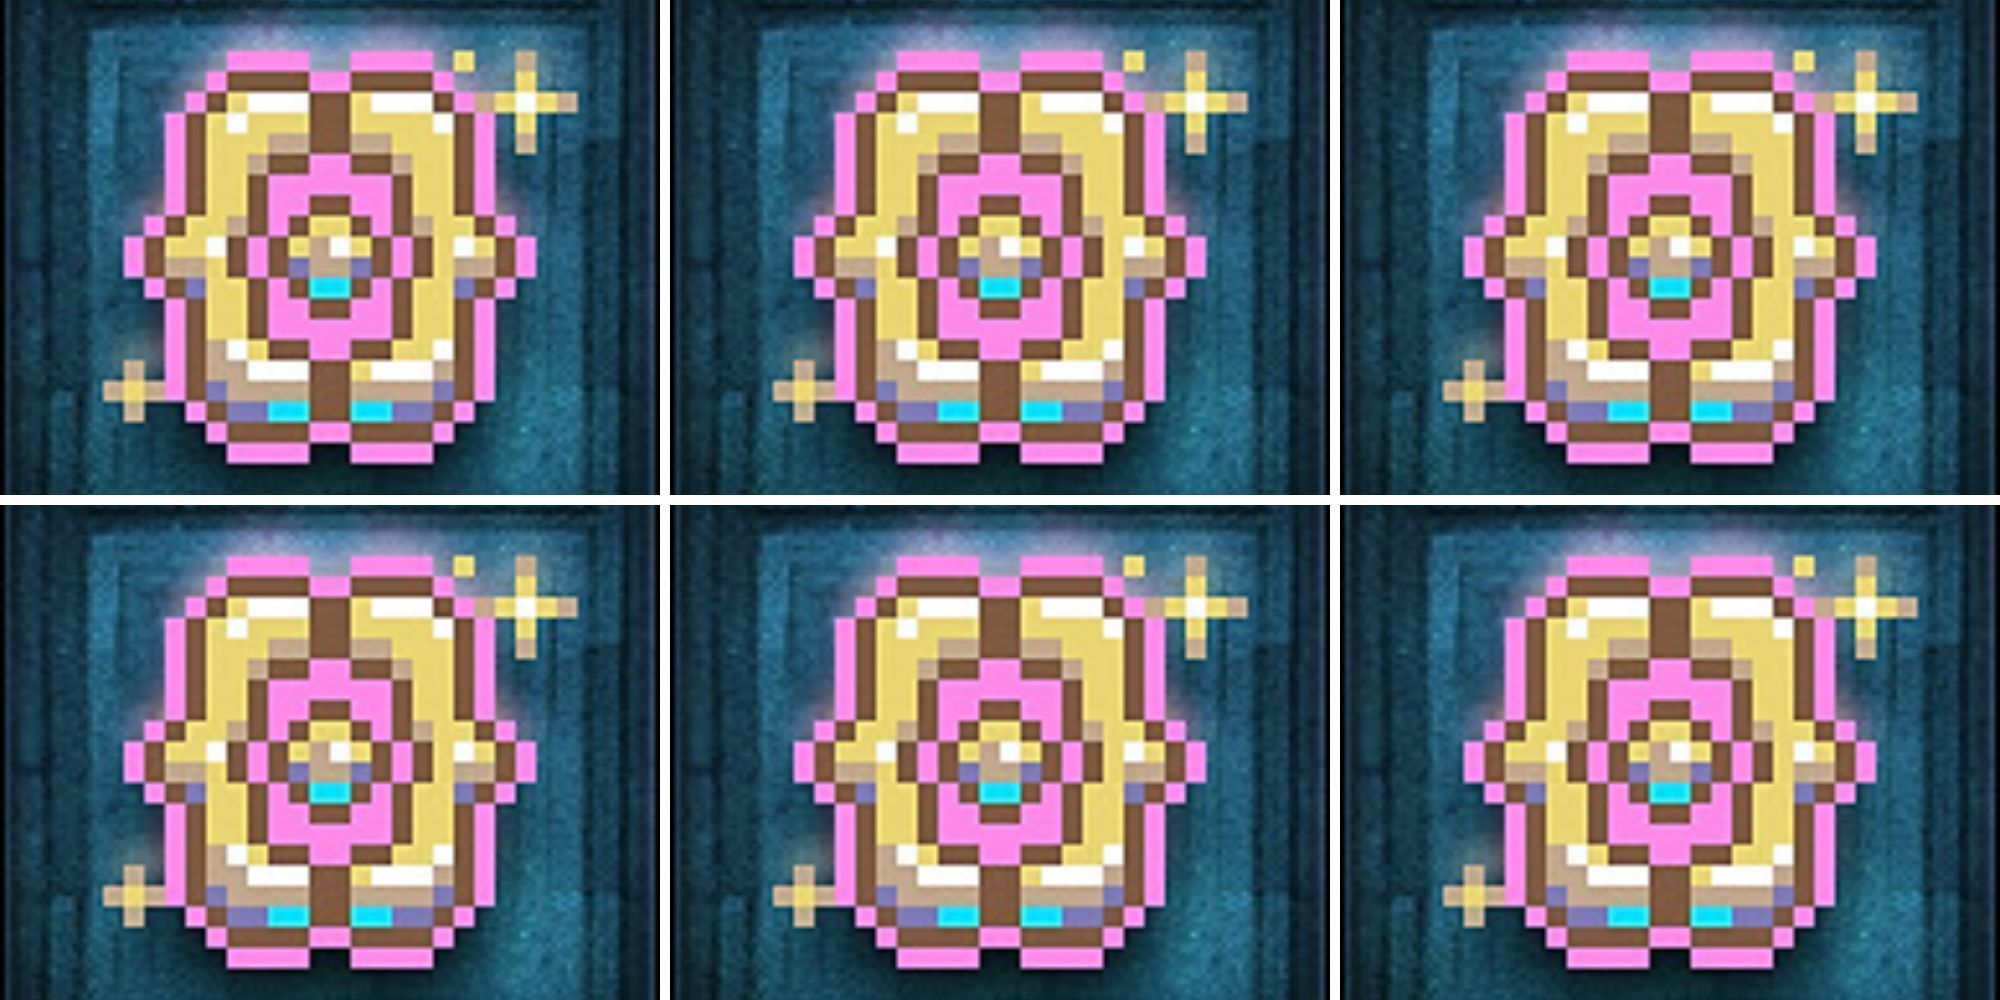 Repeating yellow and pink pattern of the Pebcakes achievement icon.